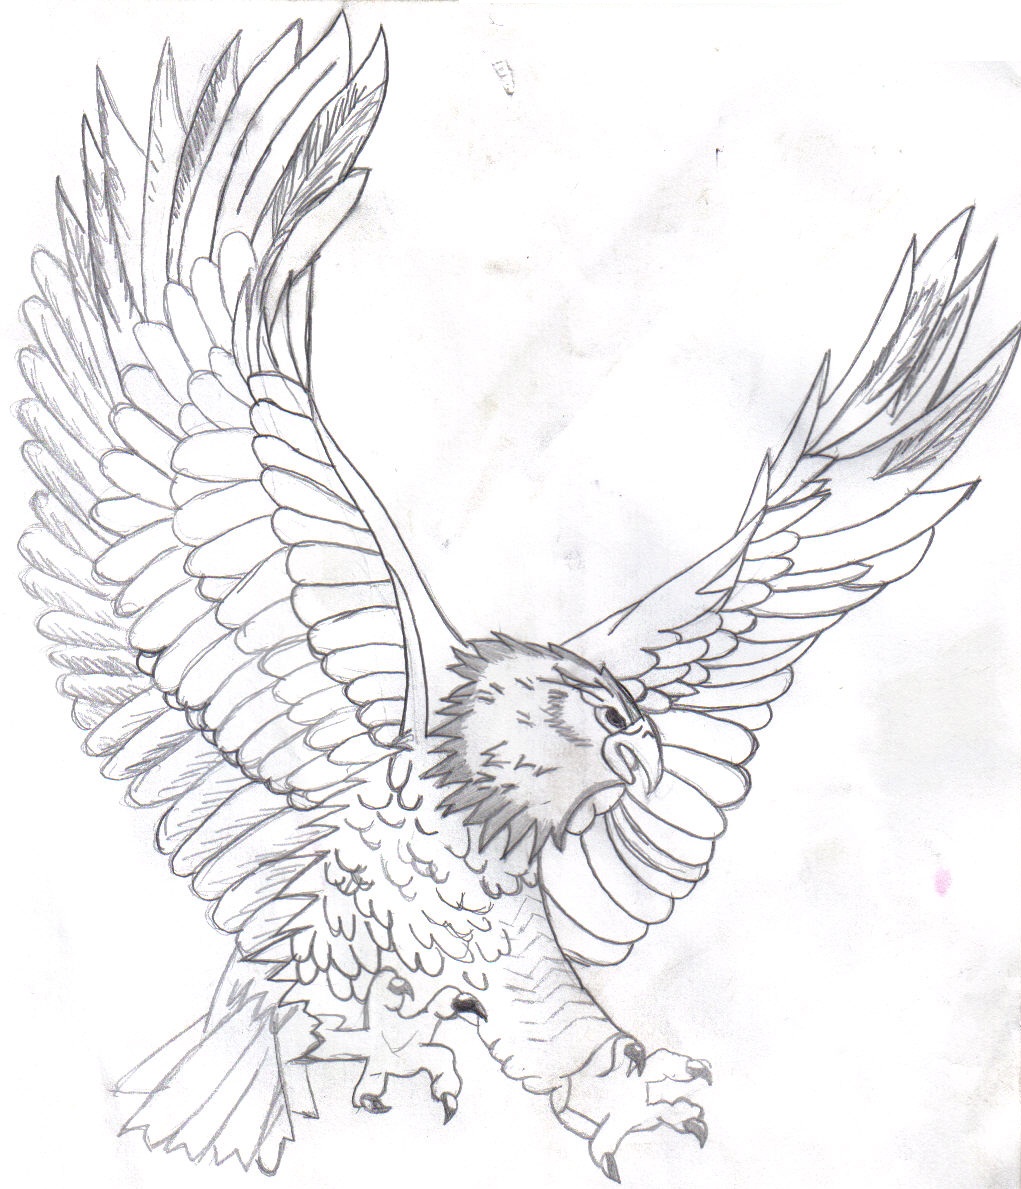 Eagle Coloring Page For Kids